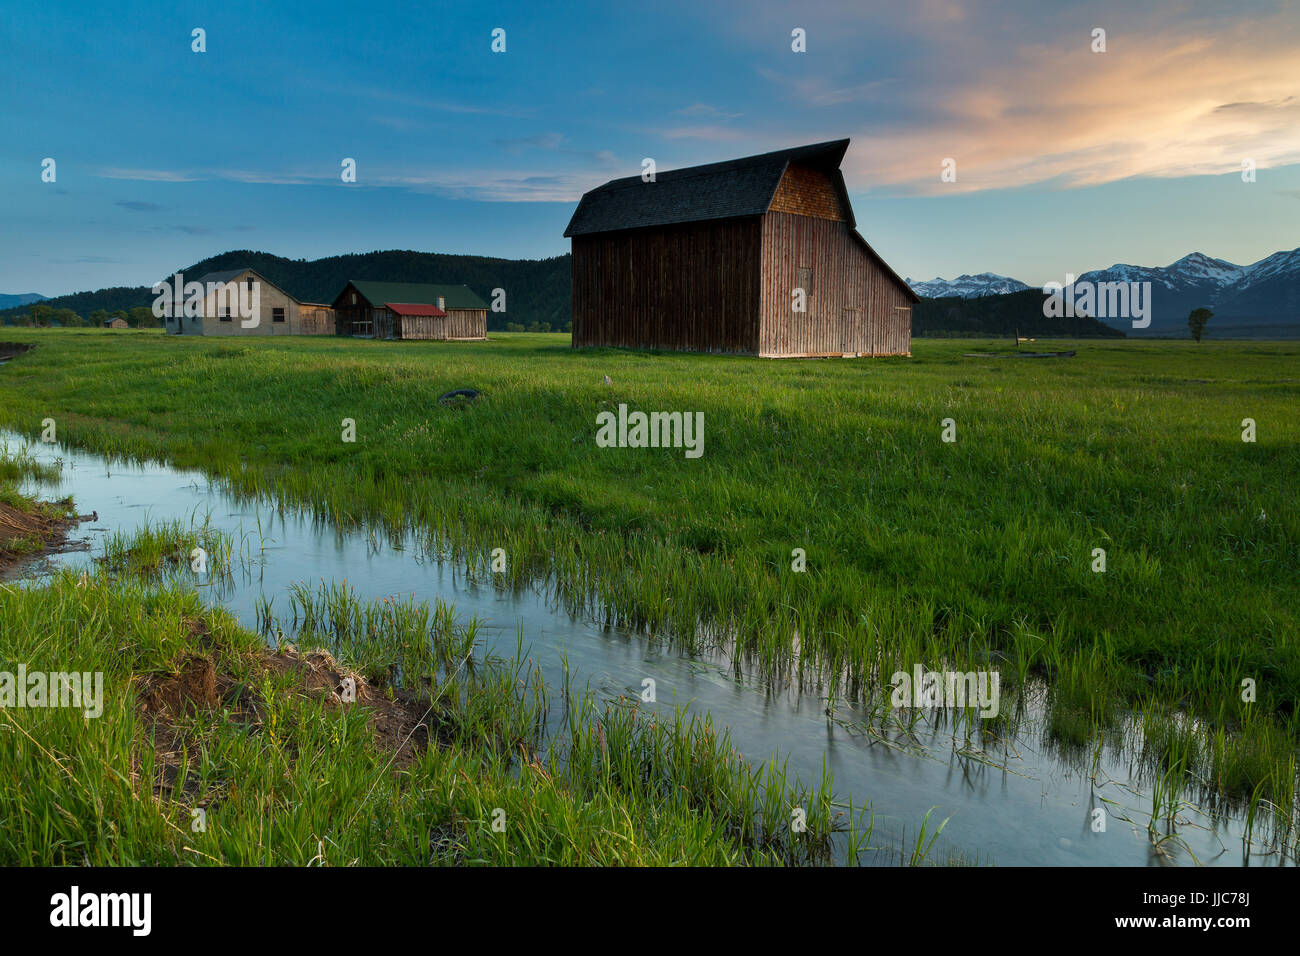 A series of houses and barns on the north end of Mormon Row and Jackson Hole in front of the Teton Mountains. Grand Teton National Park, Wyoming Stock Photo